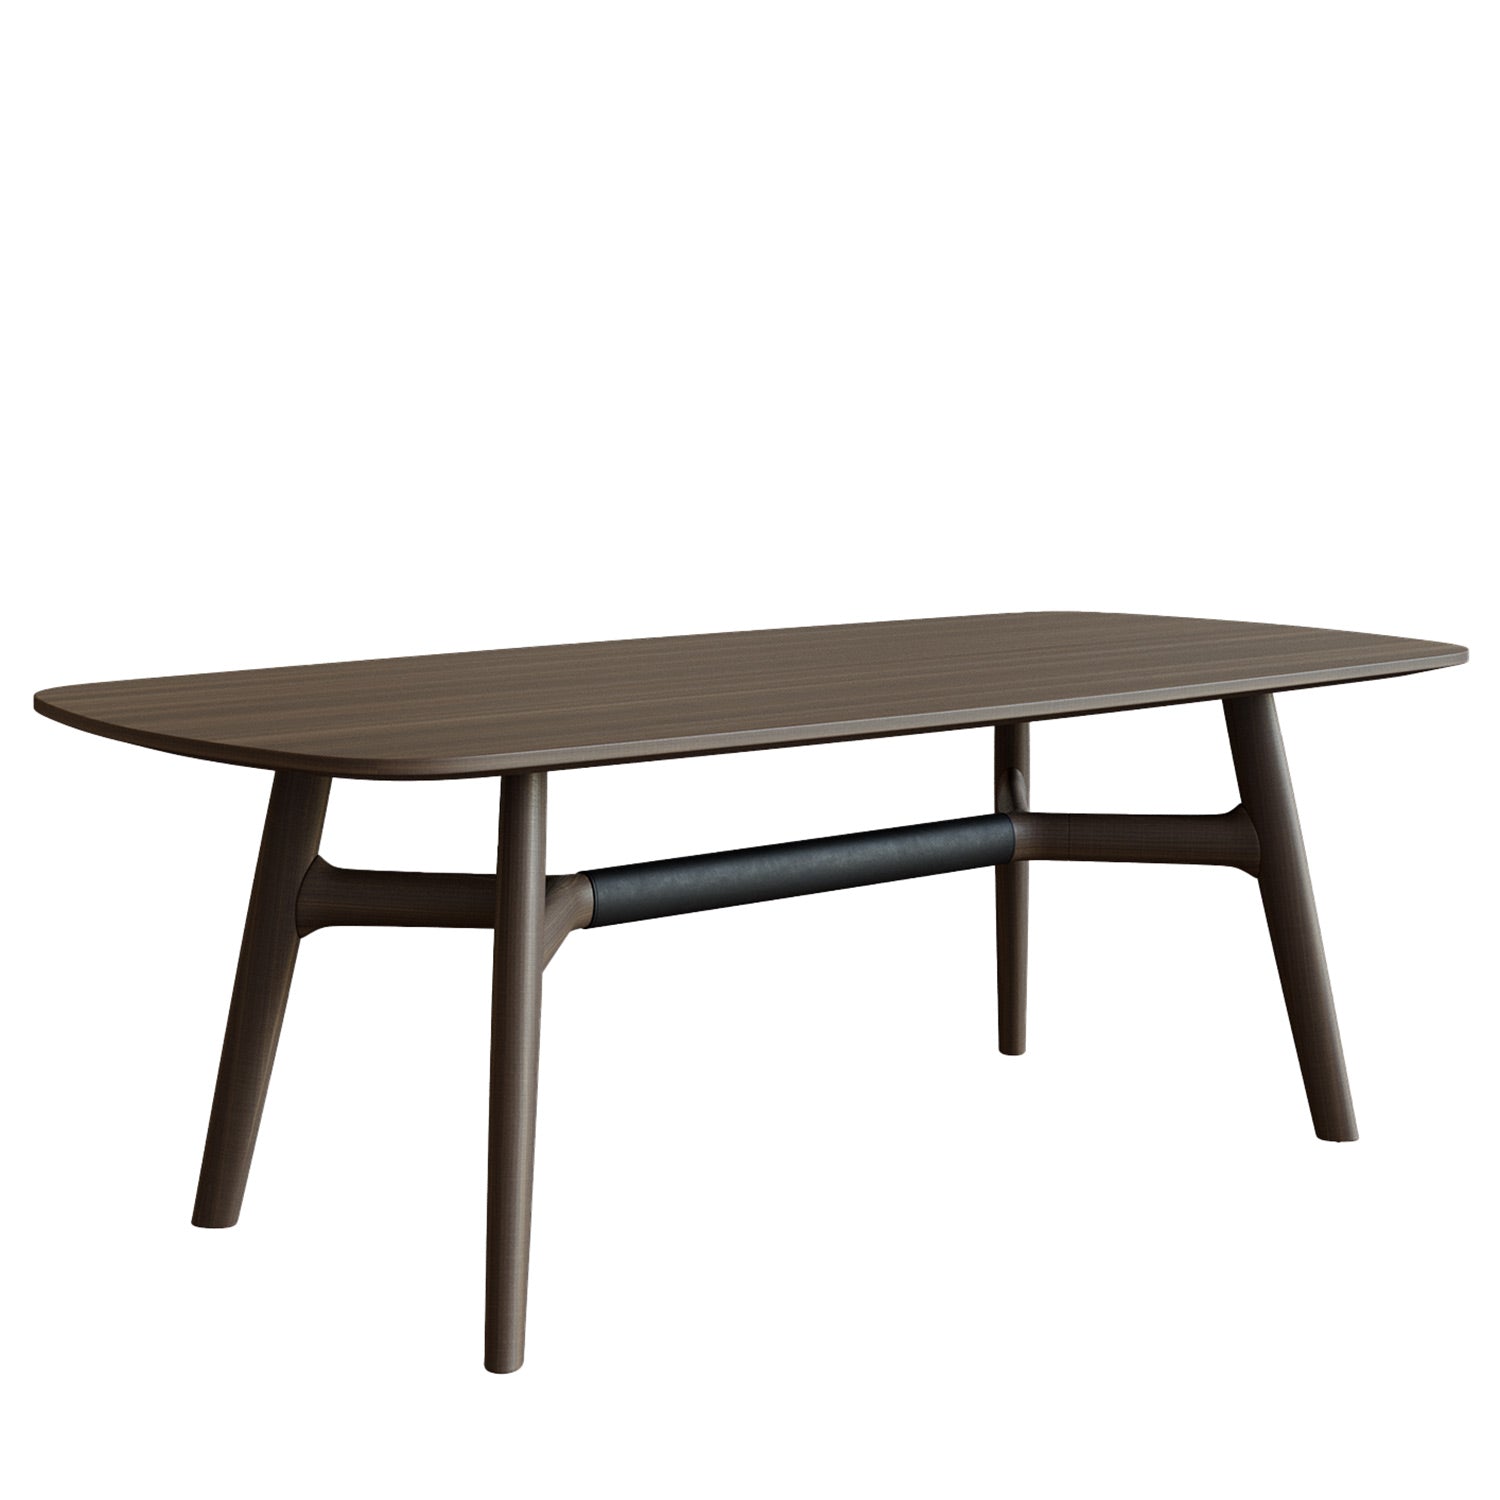 Celoni dining table